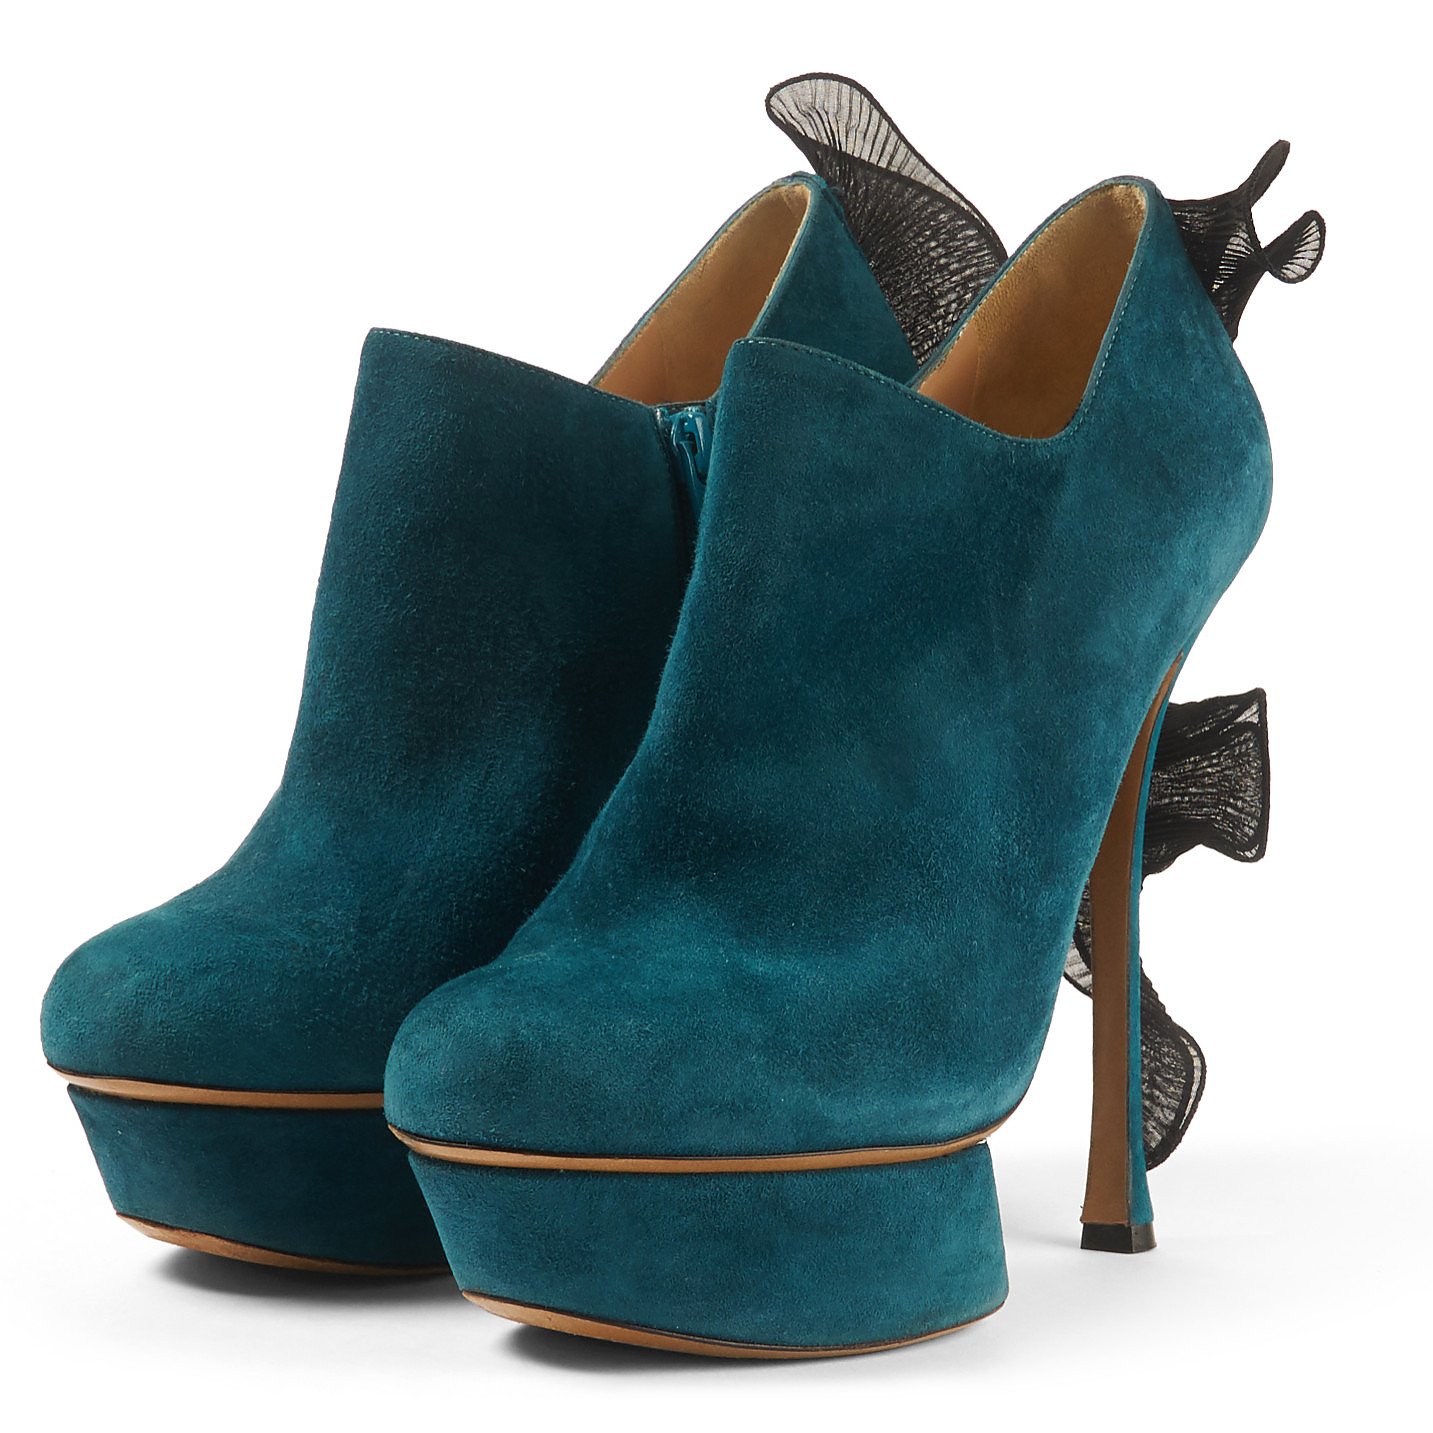 Nicholas Kirkwood Suede Ruffle-Trimmed Stiletto Ankle Boots